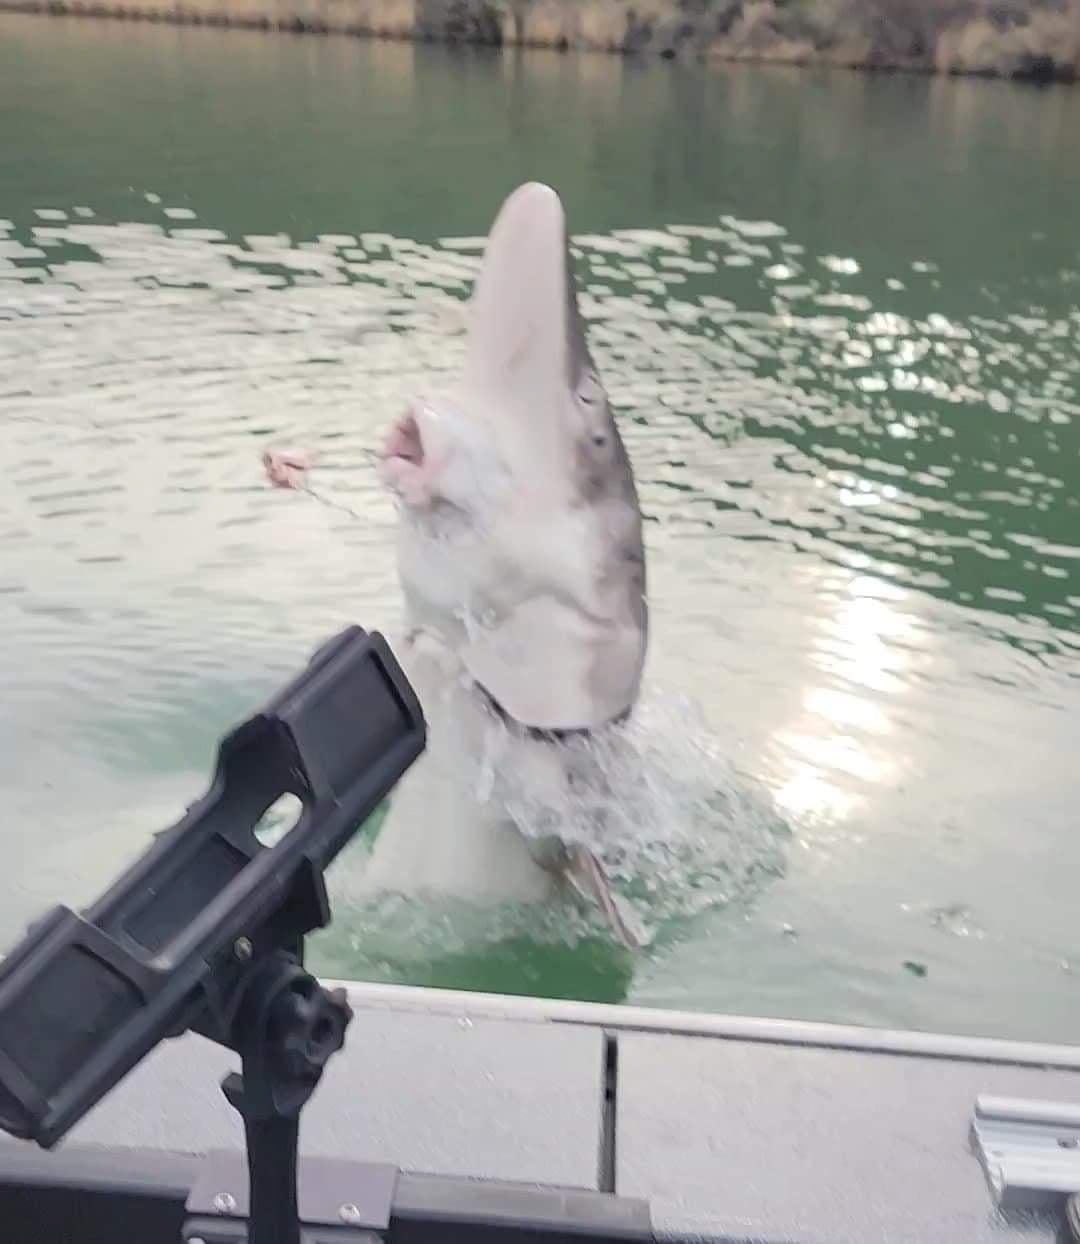 The sturgeon is photographed jumping out of the water beside the boat. (Courtesy of Joe Weisner, <a href="https://www.facebook.com/jonessportfishing/">Jones Sport Fishing</a>)